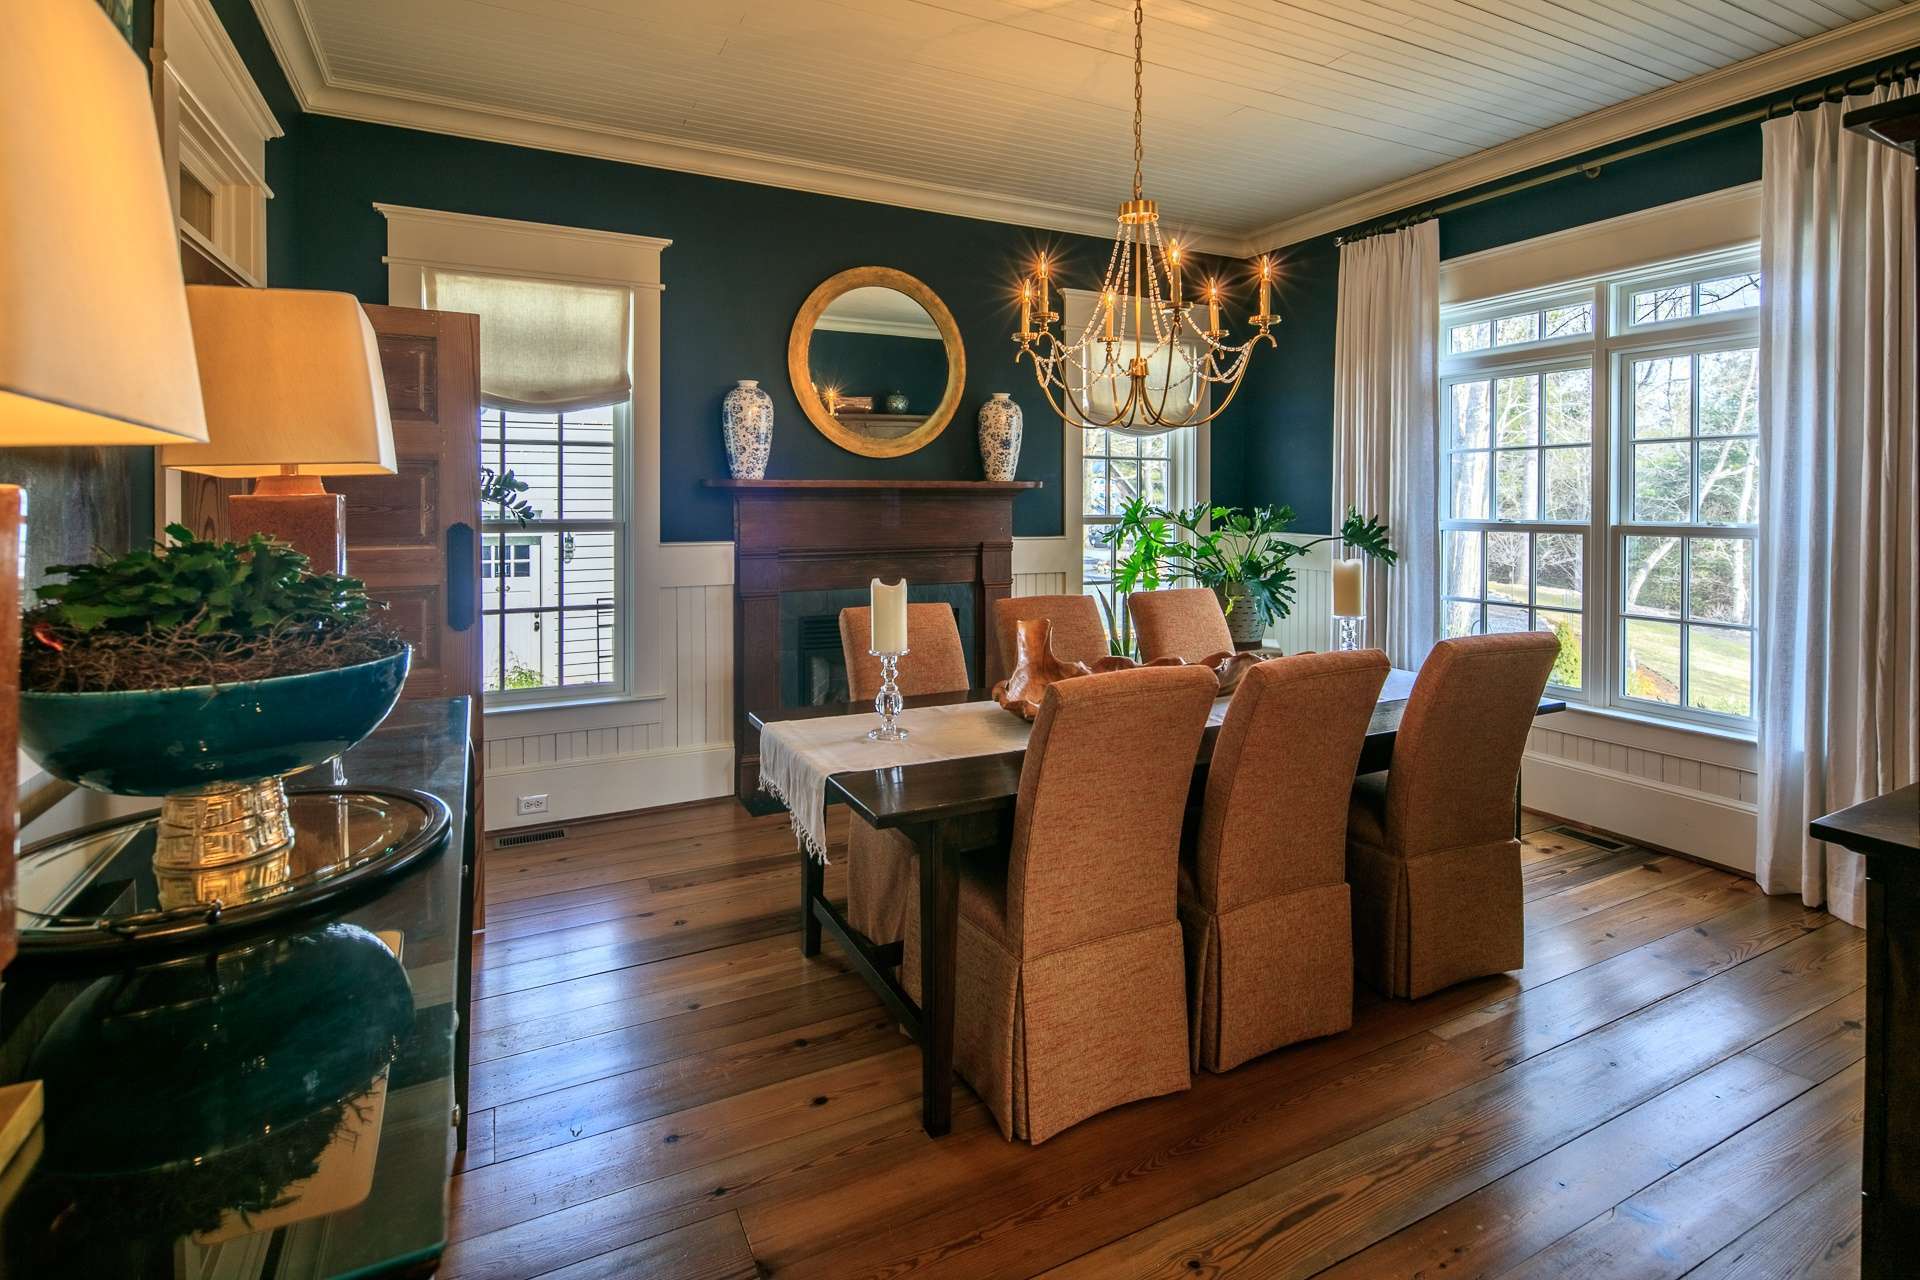 To the right of the entry foyer, is the gracious formal dining room filled with natural light and the third fireplace to enhance the dining experience.